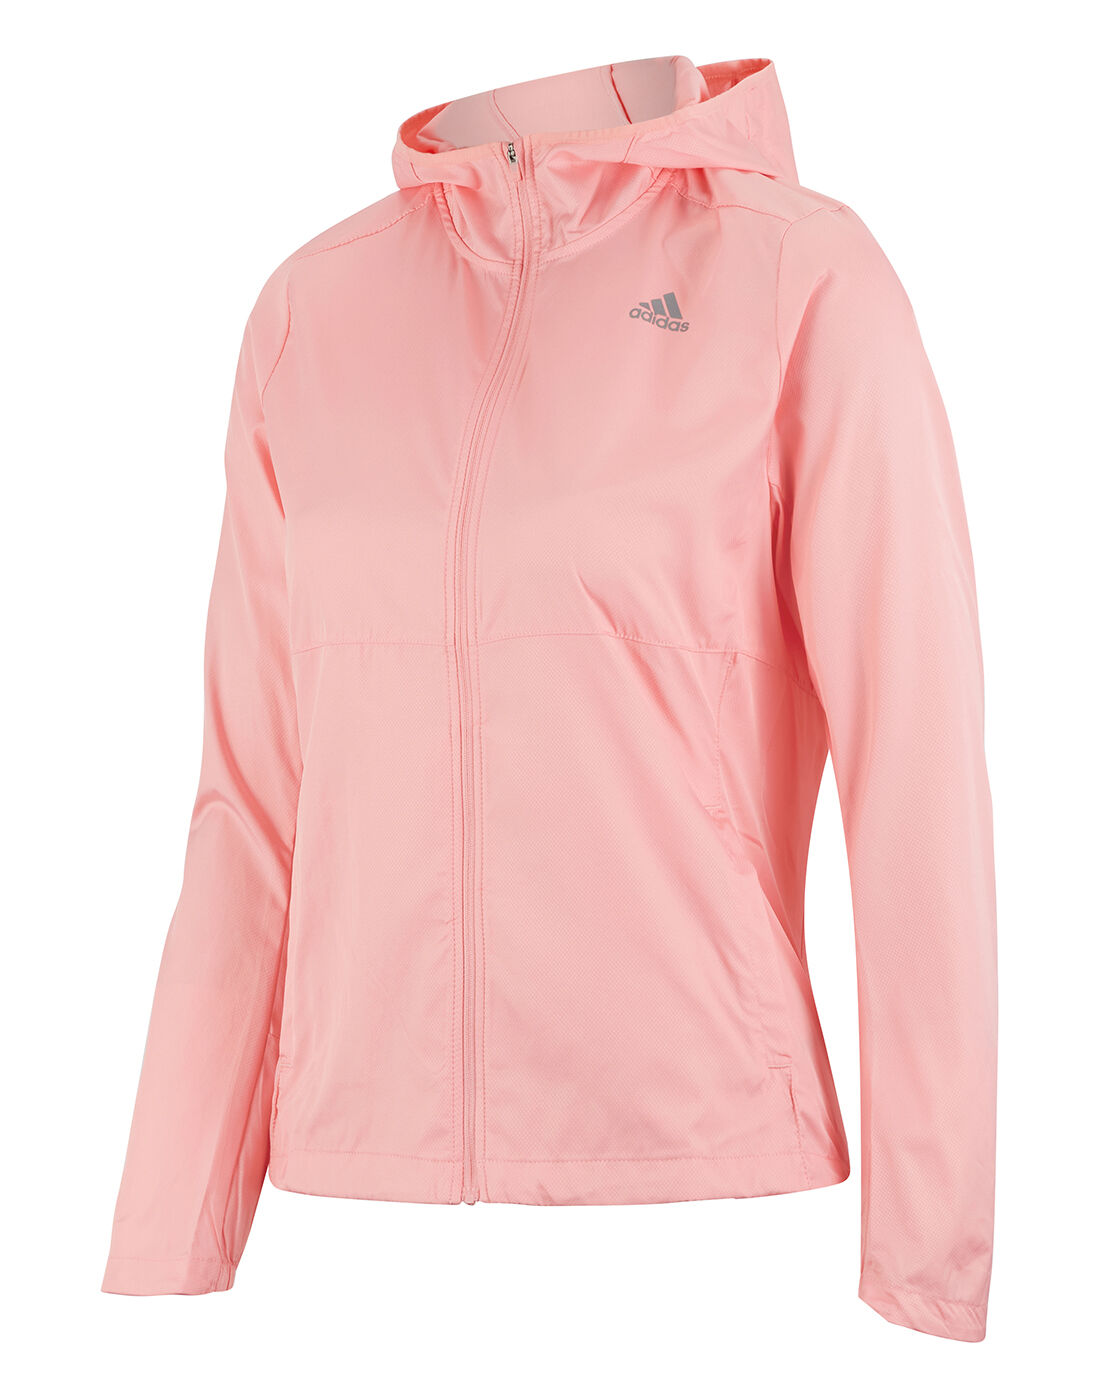 adidas Womens Own the Run Jacket - Pink 